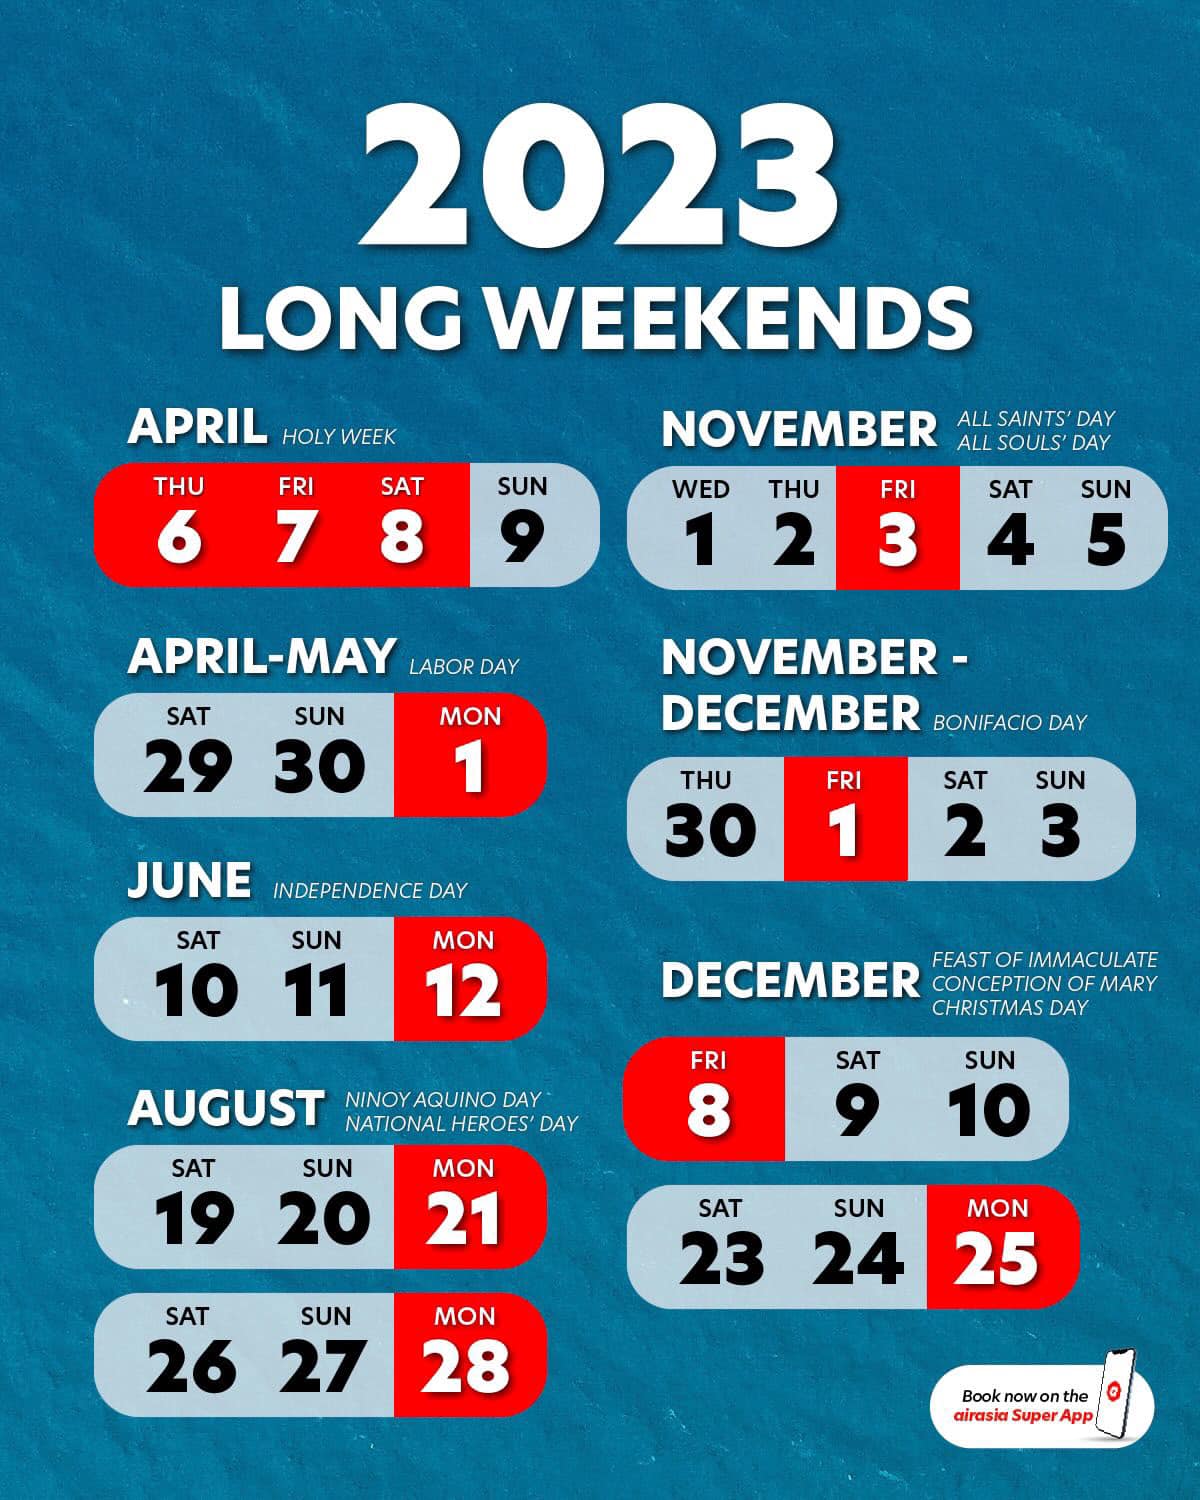 2023-holidays-and-long-weekends-in-the-philippines-cebu-pacific-fares